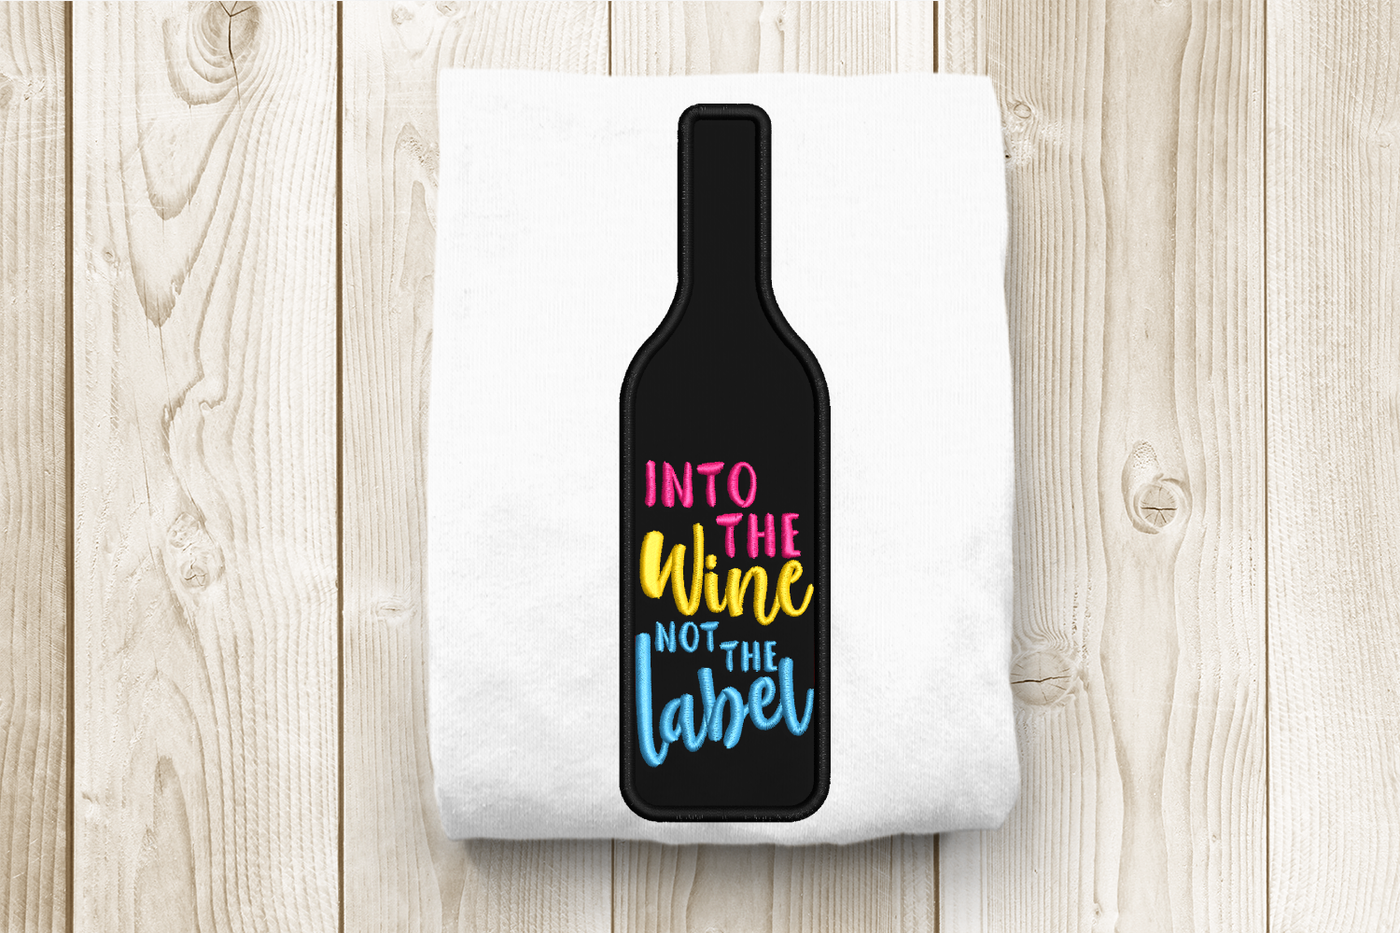 Wine bottle applique design that says "into the wine not the label"